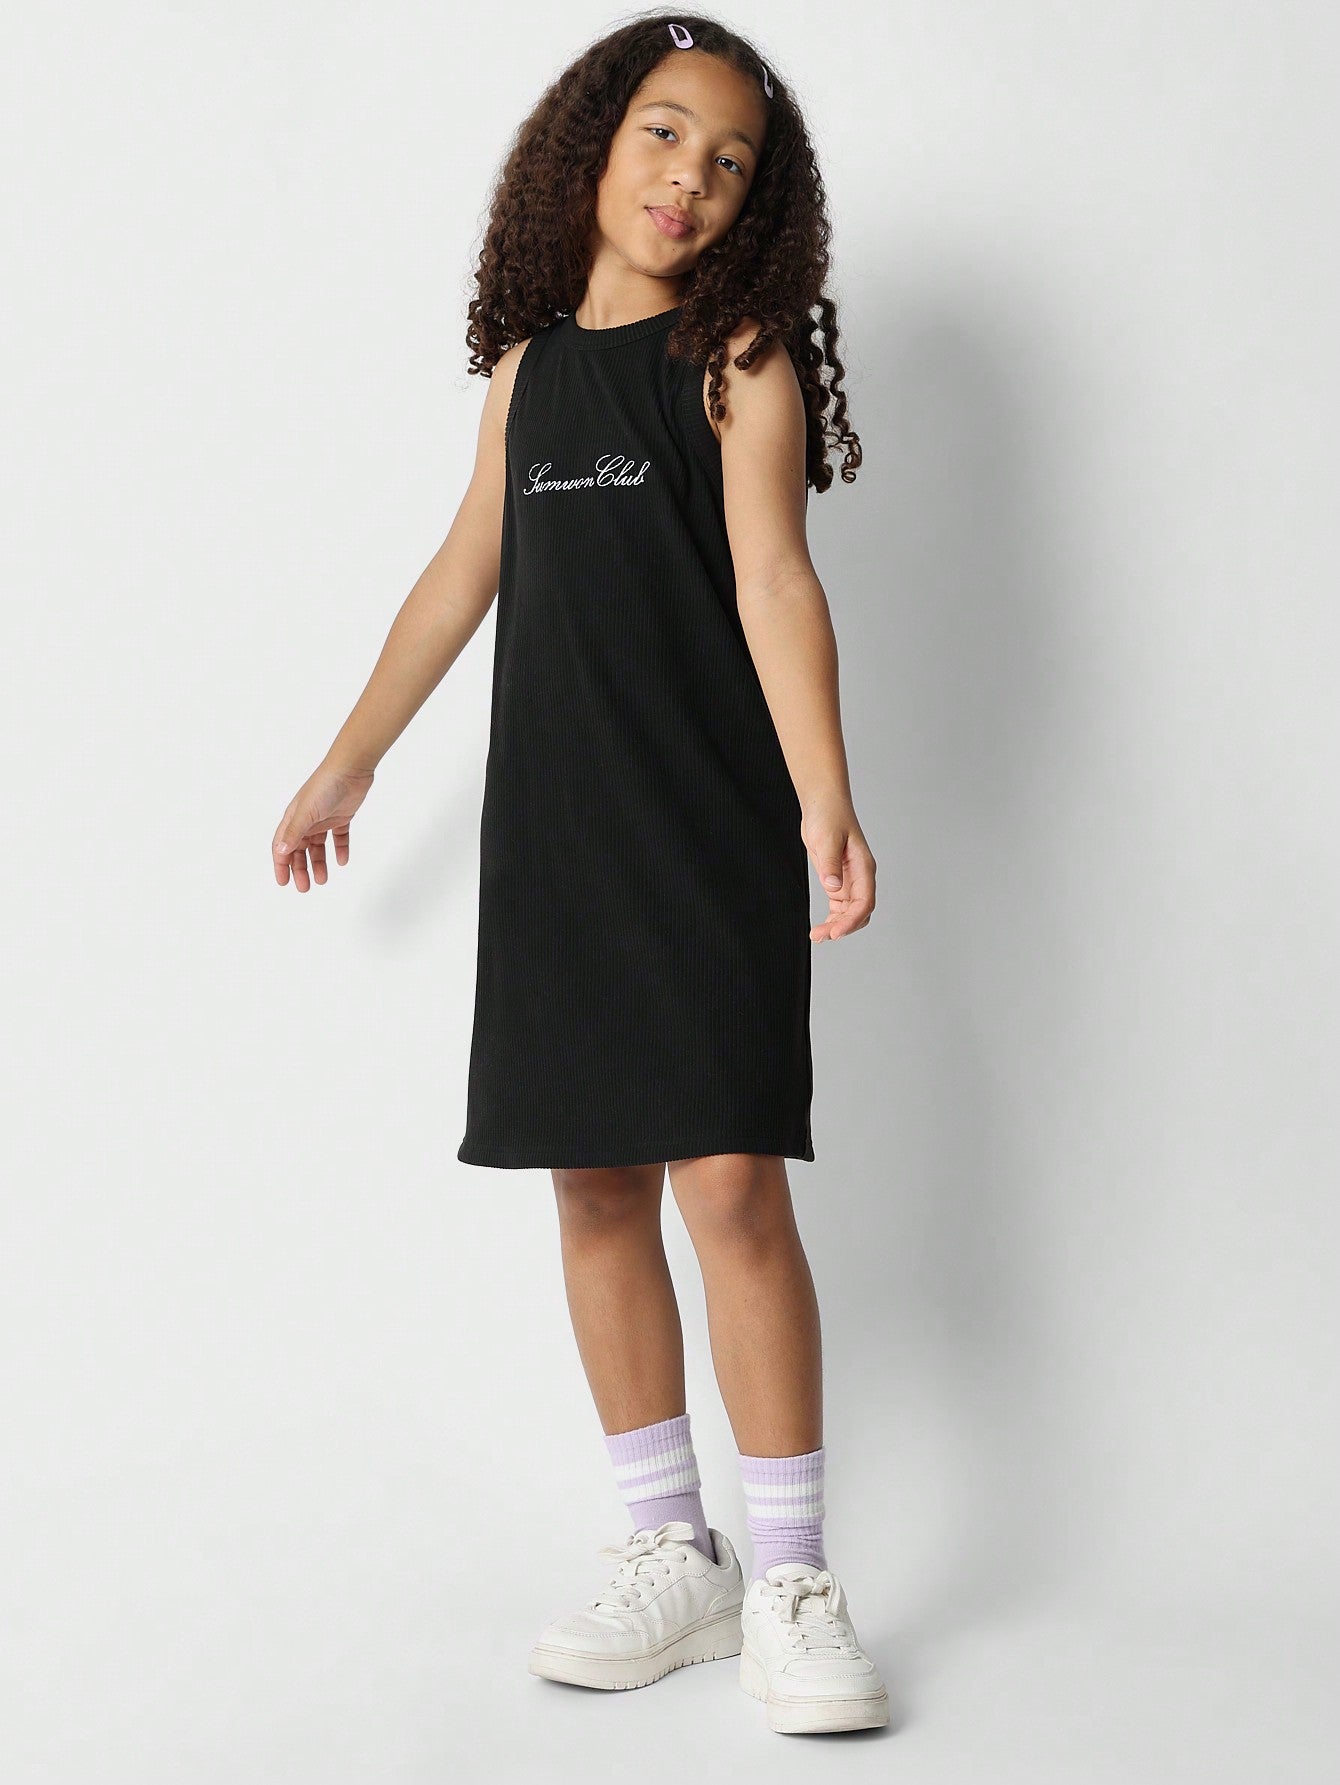 Tween Girls Tank Dress WIth Embroidery